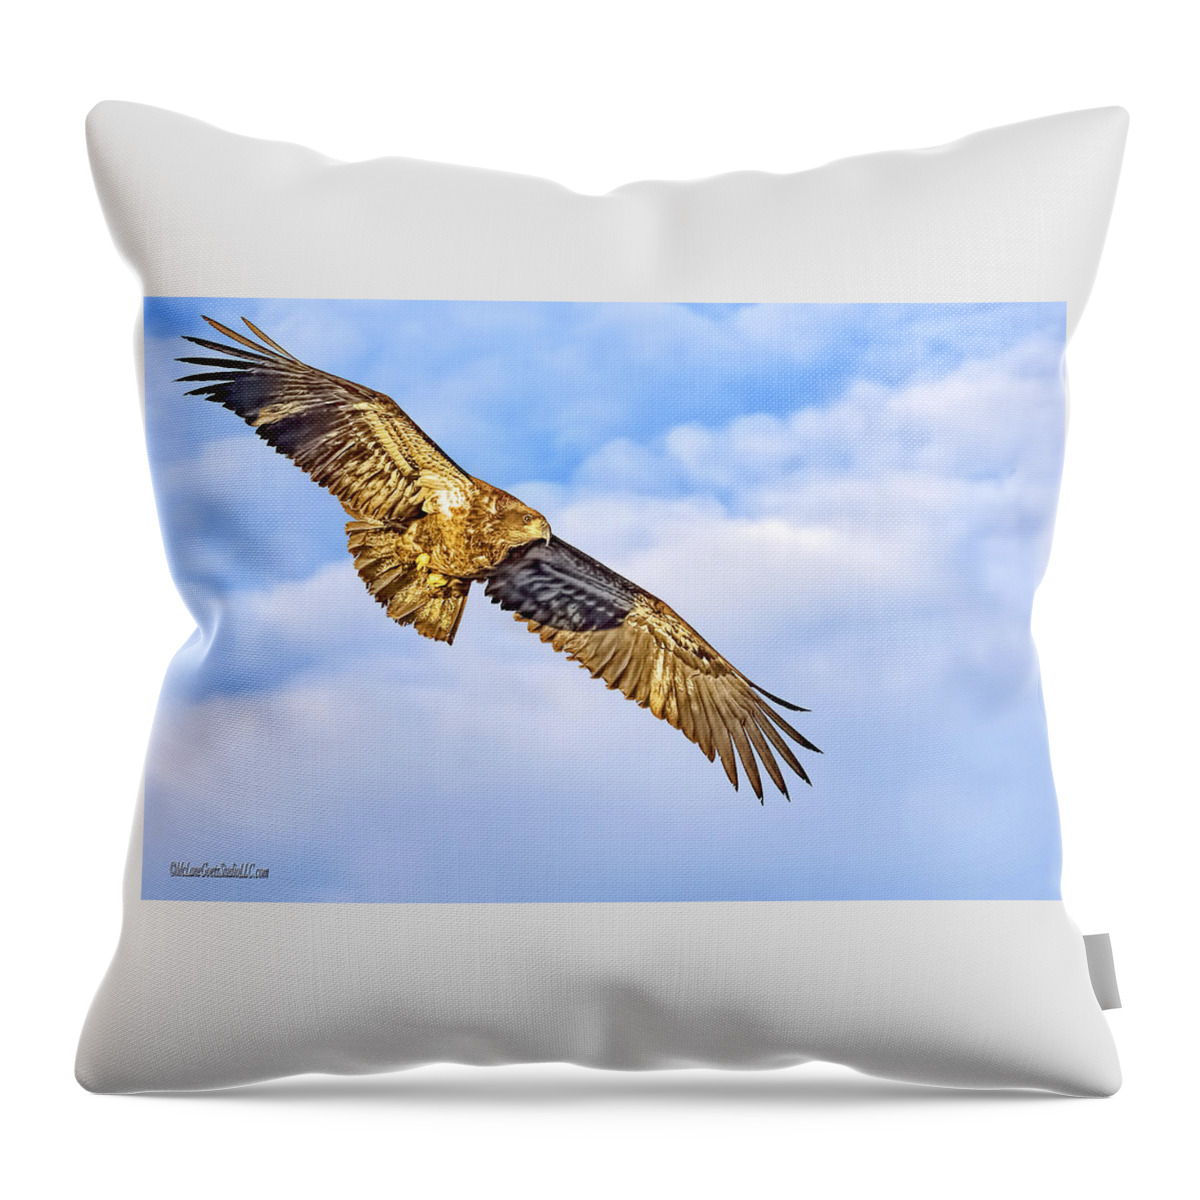 Eagle Throw Pillow featuring the photograph Young Bald Eagle by LeeAnn McLaneGoetz McLaneGoetzStudioLLCcom